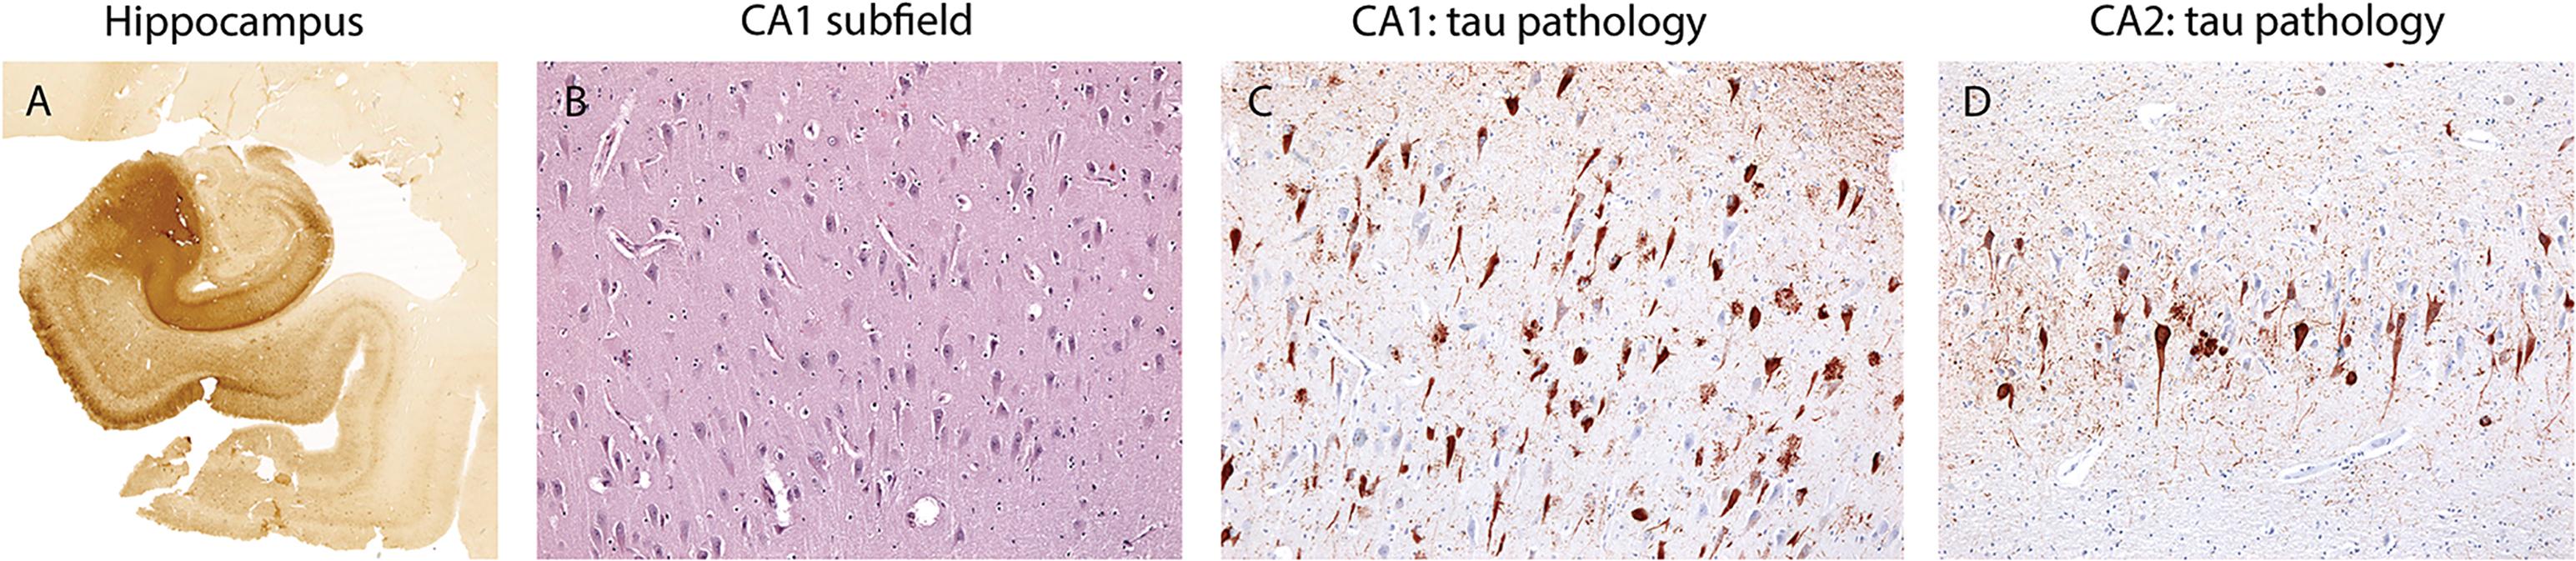 Fig. 5.1, Primary age-related tauopathy (PART). A patient with PART showing severe tau pathology within the hippocampus without beta-amyloid plaque deposition. A low-power view demonstrates tau pathology within the parahippocampal gyrus, subiculum, and hippocampus (A) . There is moderate loss of neurons within the CA1 subfield ( B , Luxol fast blue/hematoxylin and eosin stain). Tau pathology immunostaining shows numerous neurofibrillary pretangles and tangles in CA1 (C) and CA2 (D) with relative sparing of CA3 and CA4. Magnification: A , ~8×; B–C , B–D ,